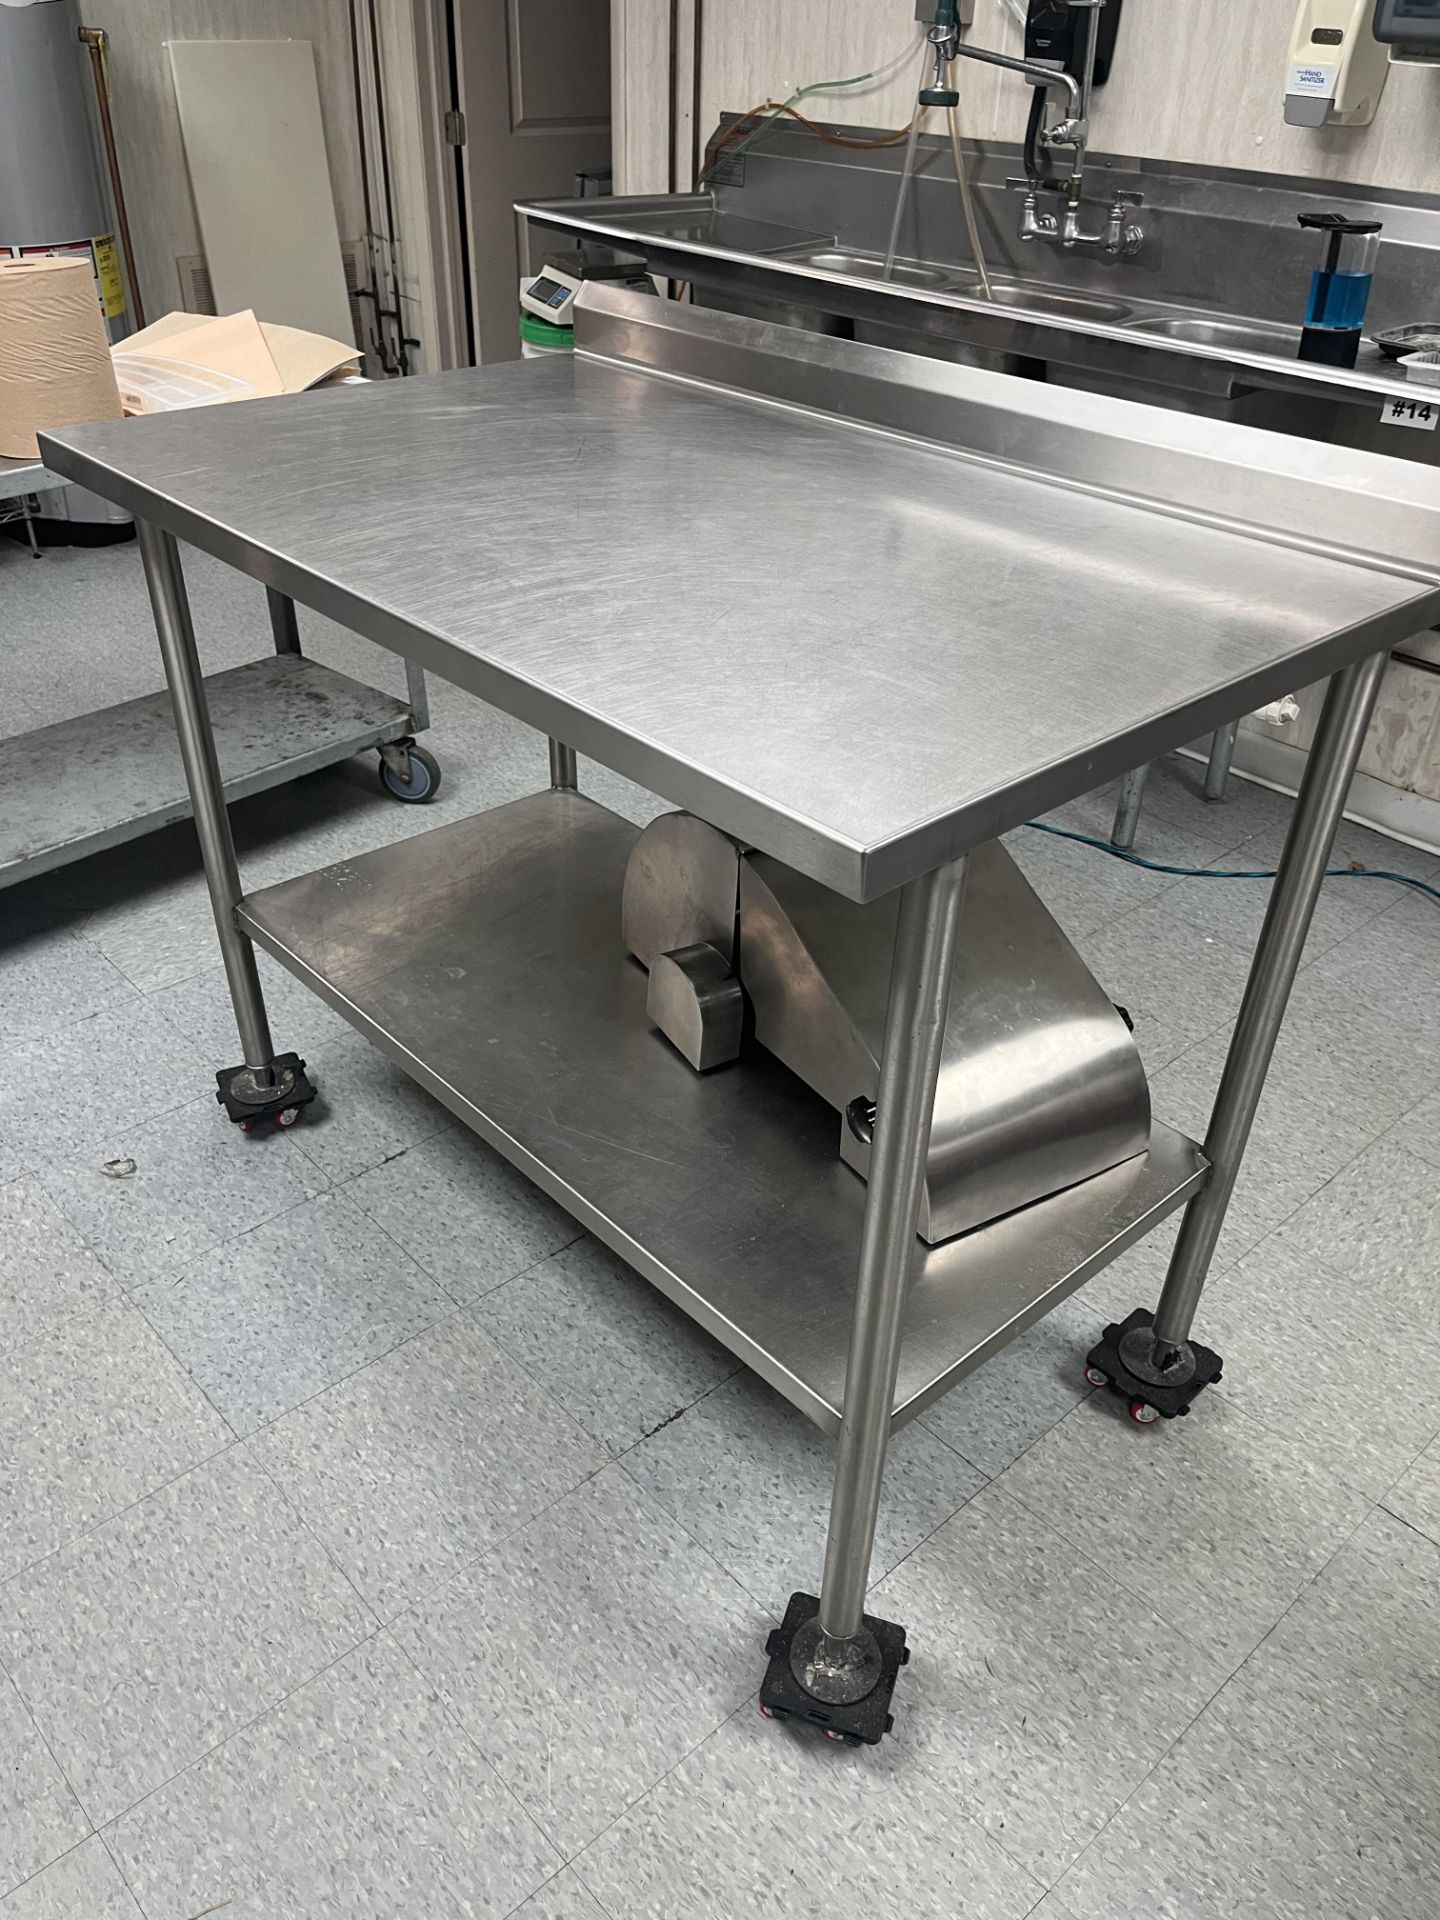 STAINLESS STEEL WORK TABLE DIMS APPROX 48" L 29" W 40" H (Located Cleveland, OH) - Image 2 of 3